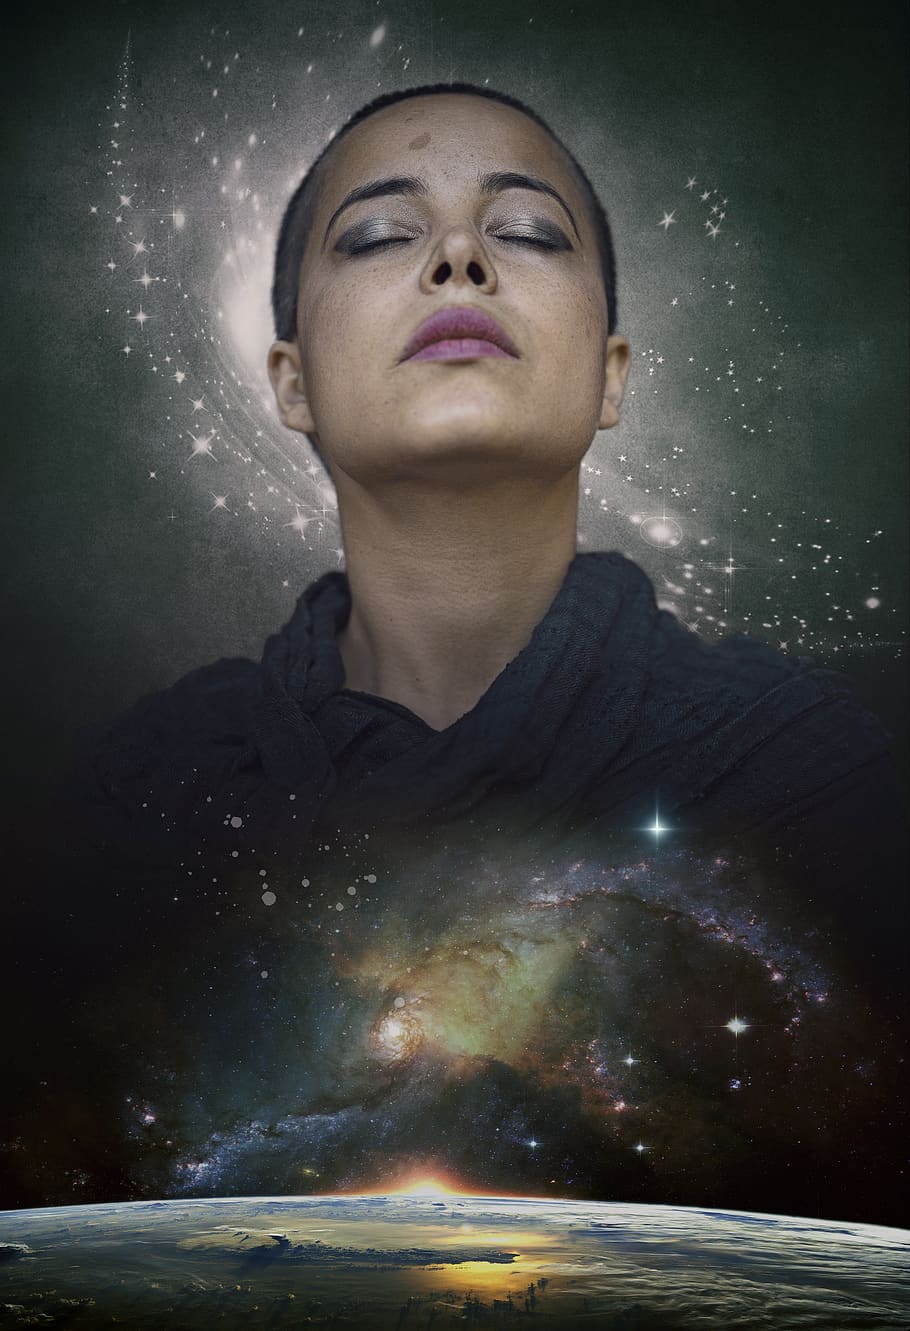 fantasy, portrait, fantasy portrait, meditation, conciousness, space, constellations, mother earth, woman, beauty